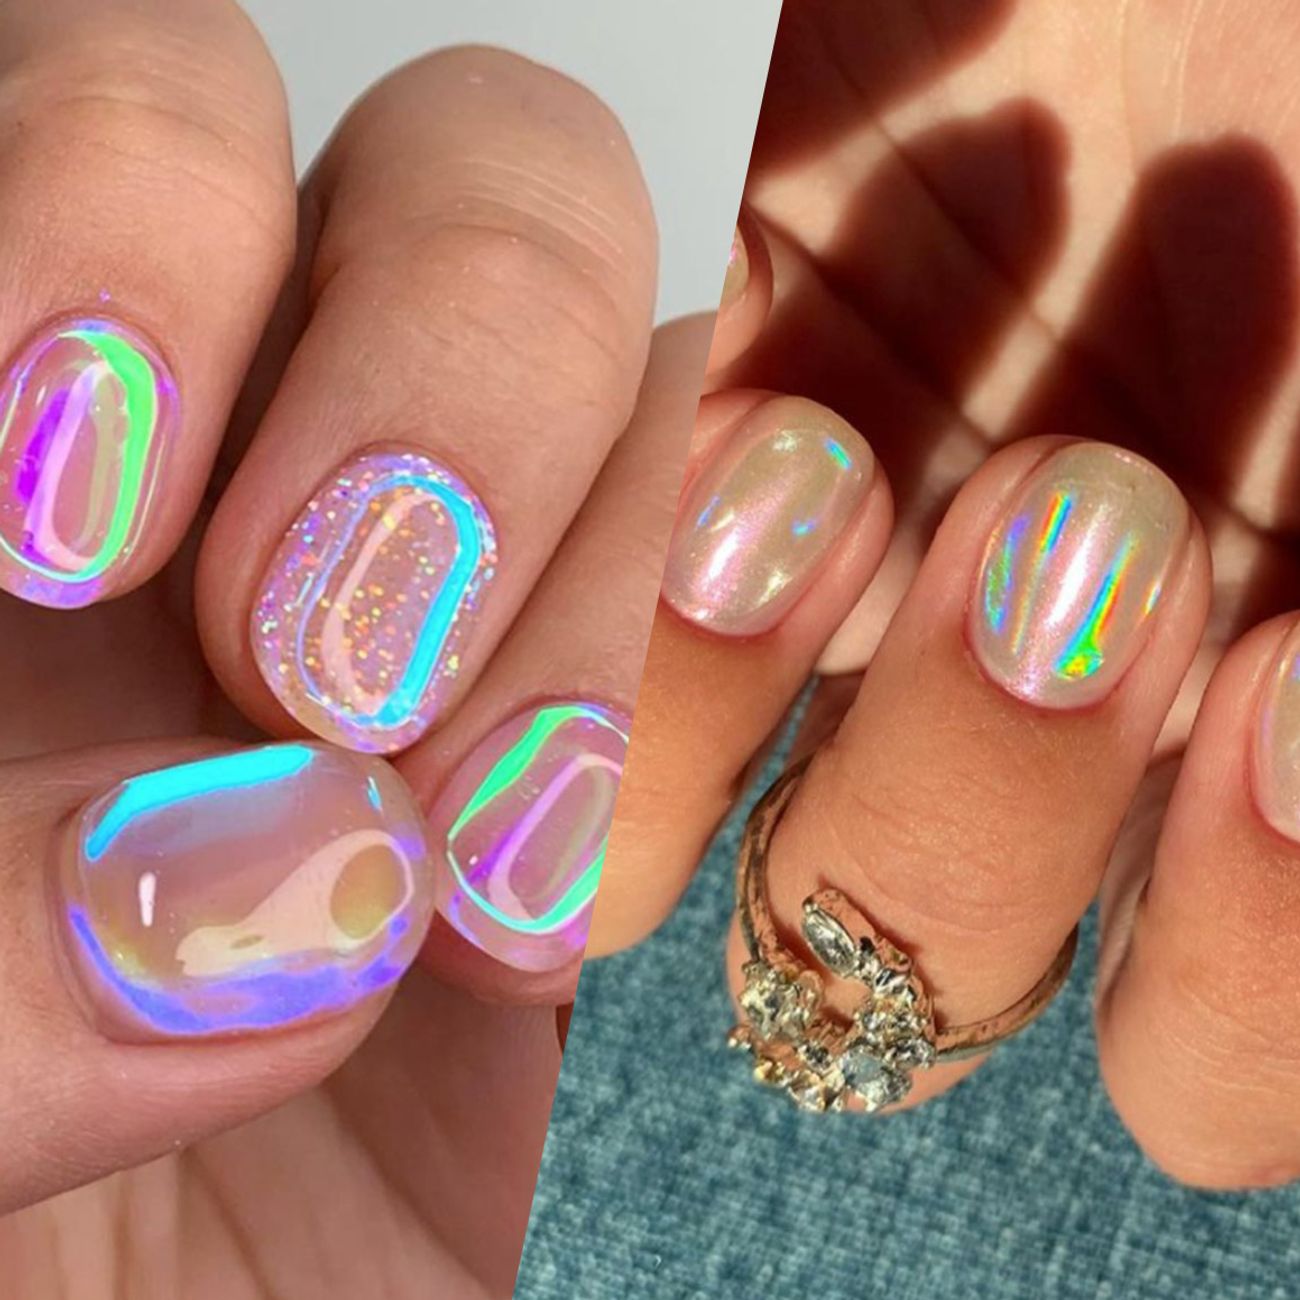 Tendance manucure : quand le nail tattoo décore nos ongles